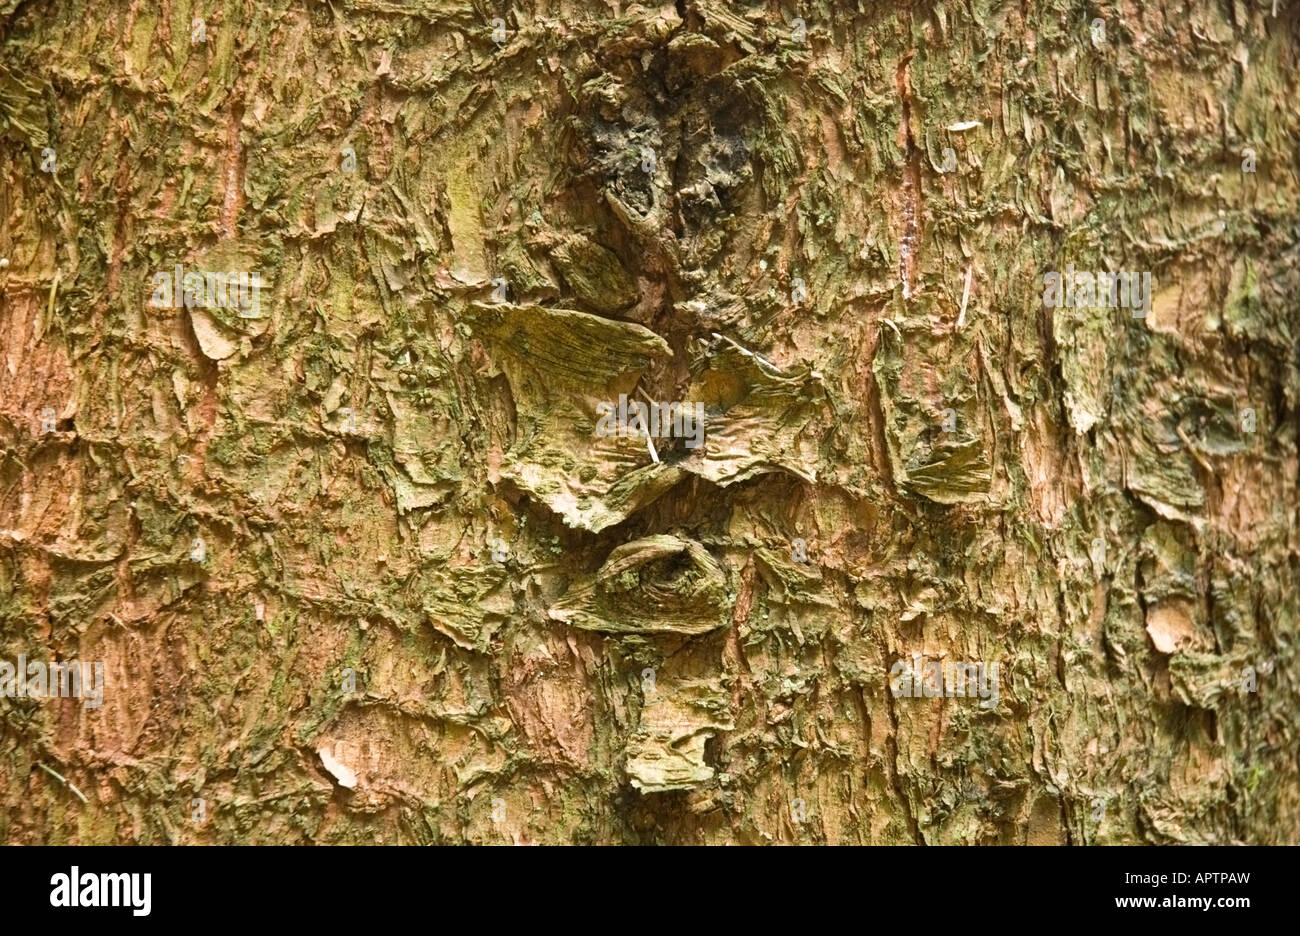 A close up image of tree bark showing the texture. Stock Photo